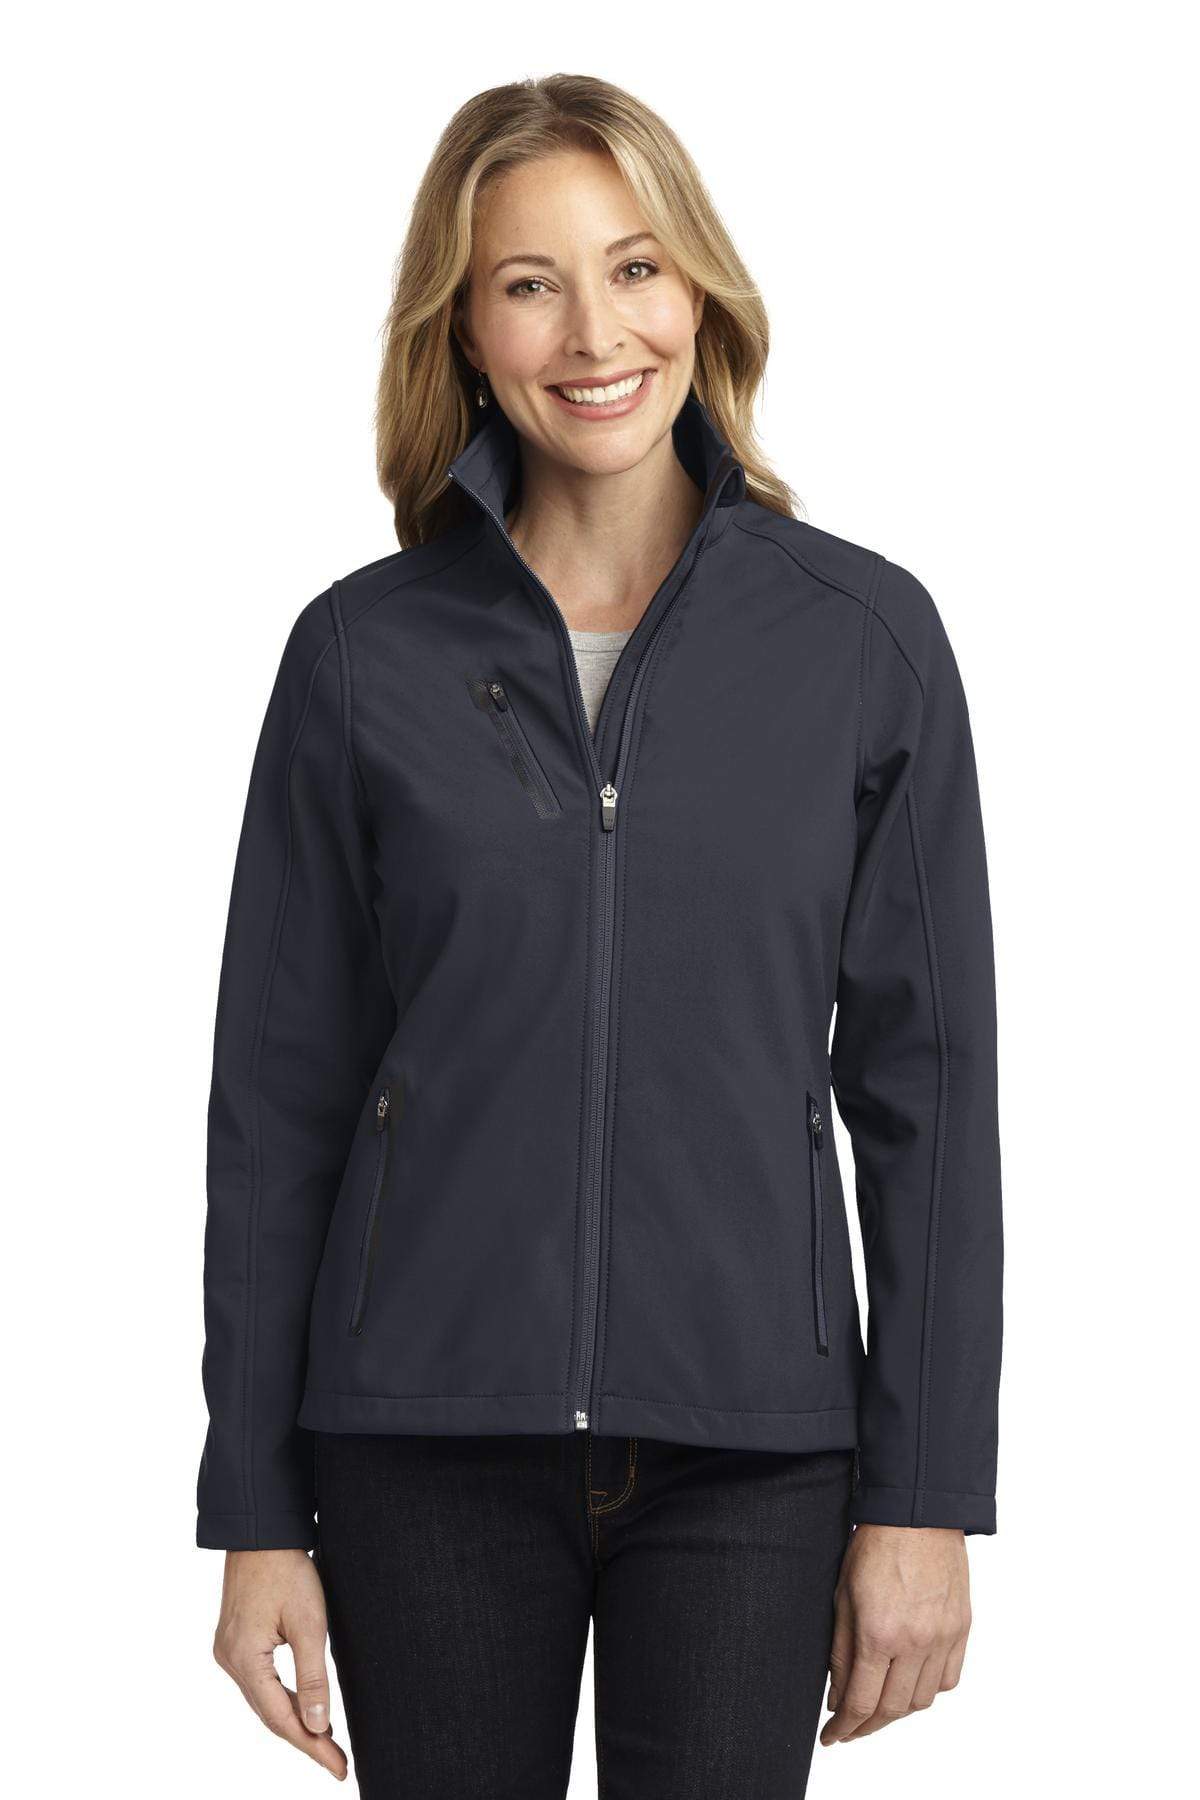 Port Authority Ladies Welded Soft Shell Jacket L3243043